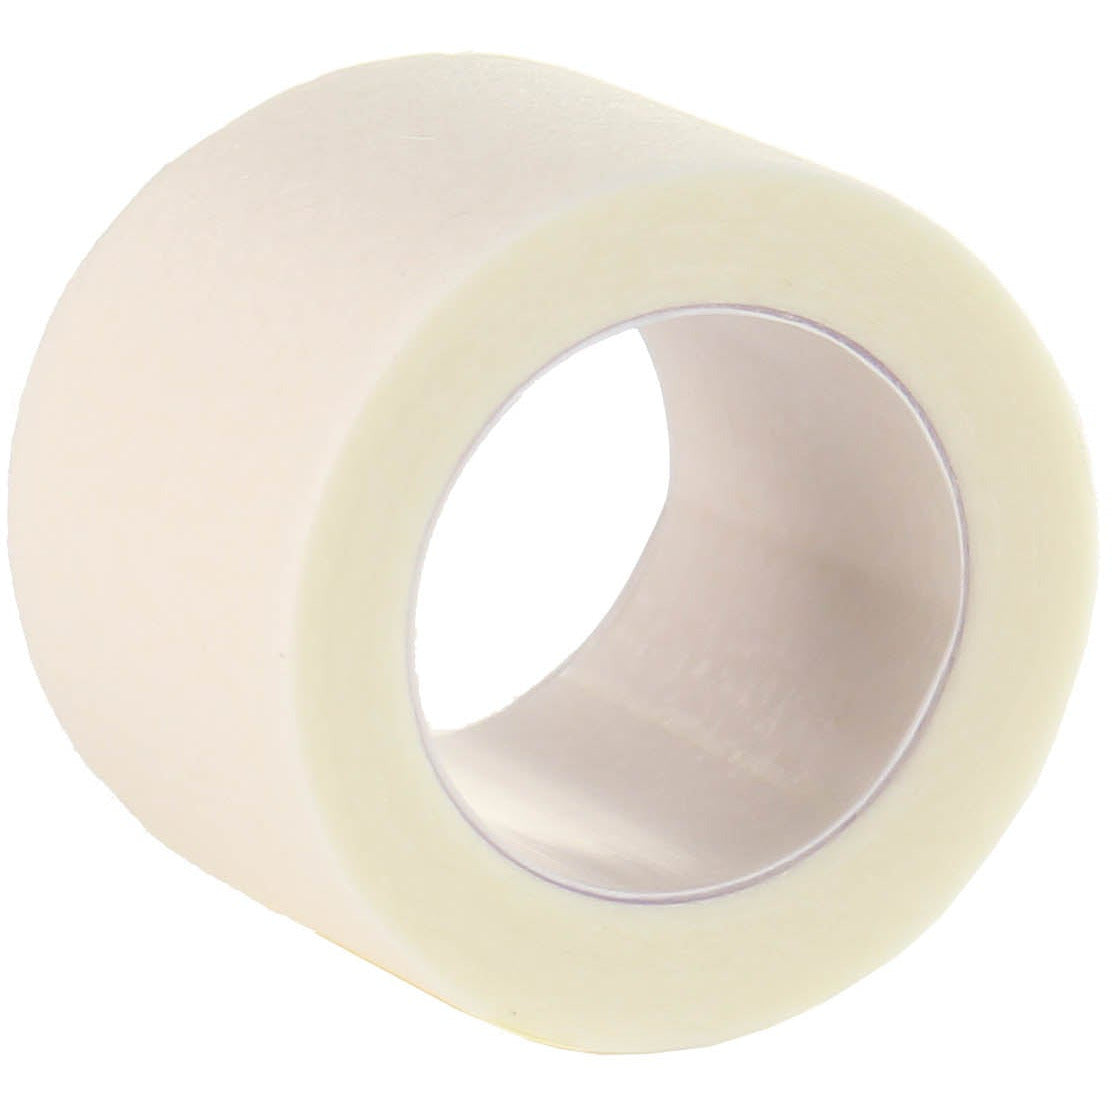 Finepore Microporous Surgical Tape - 2.5cm x 9.1m - SINGLE